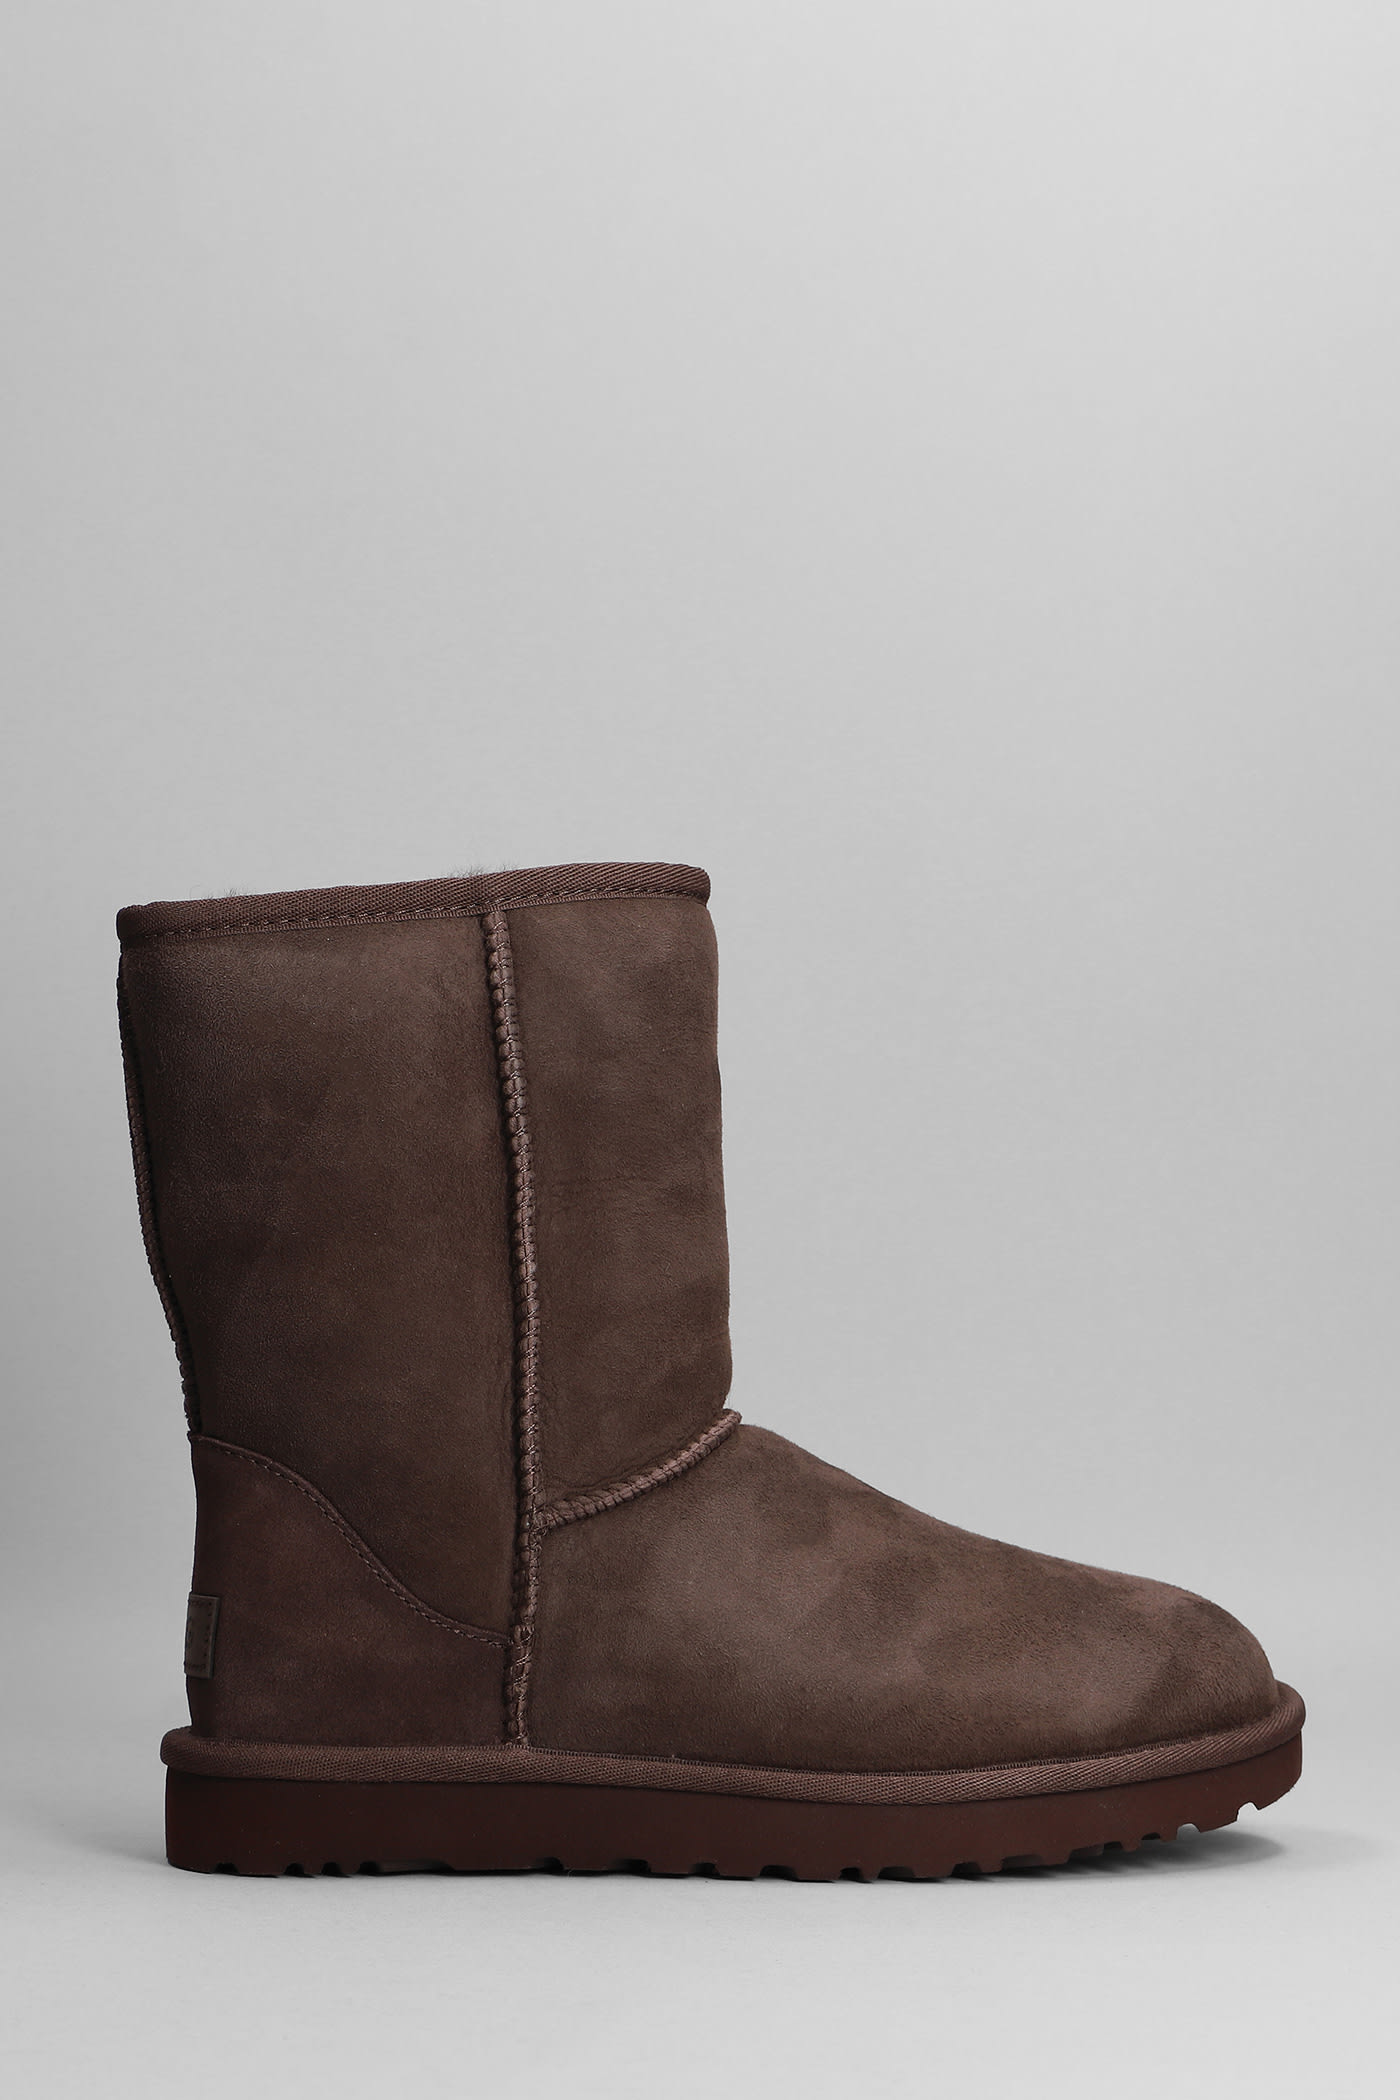 UGG Classic Short Ii High Heels Ankle Boots In Brown Suede